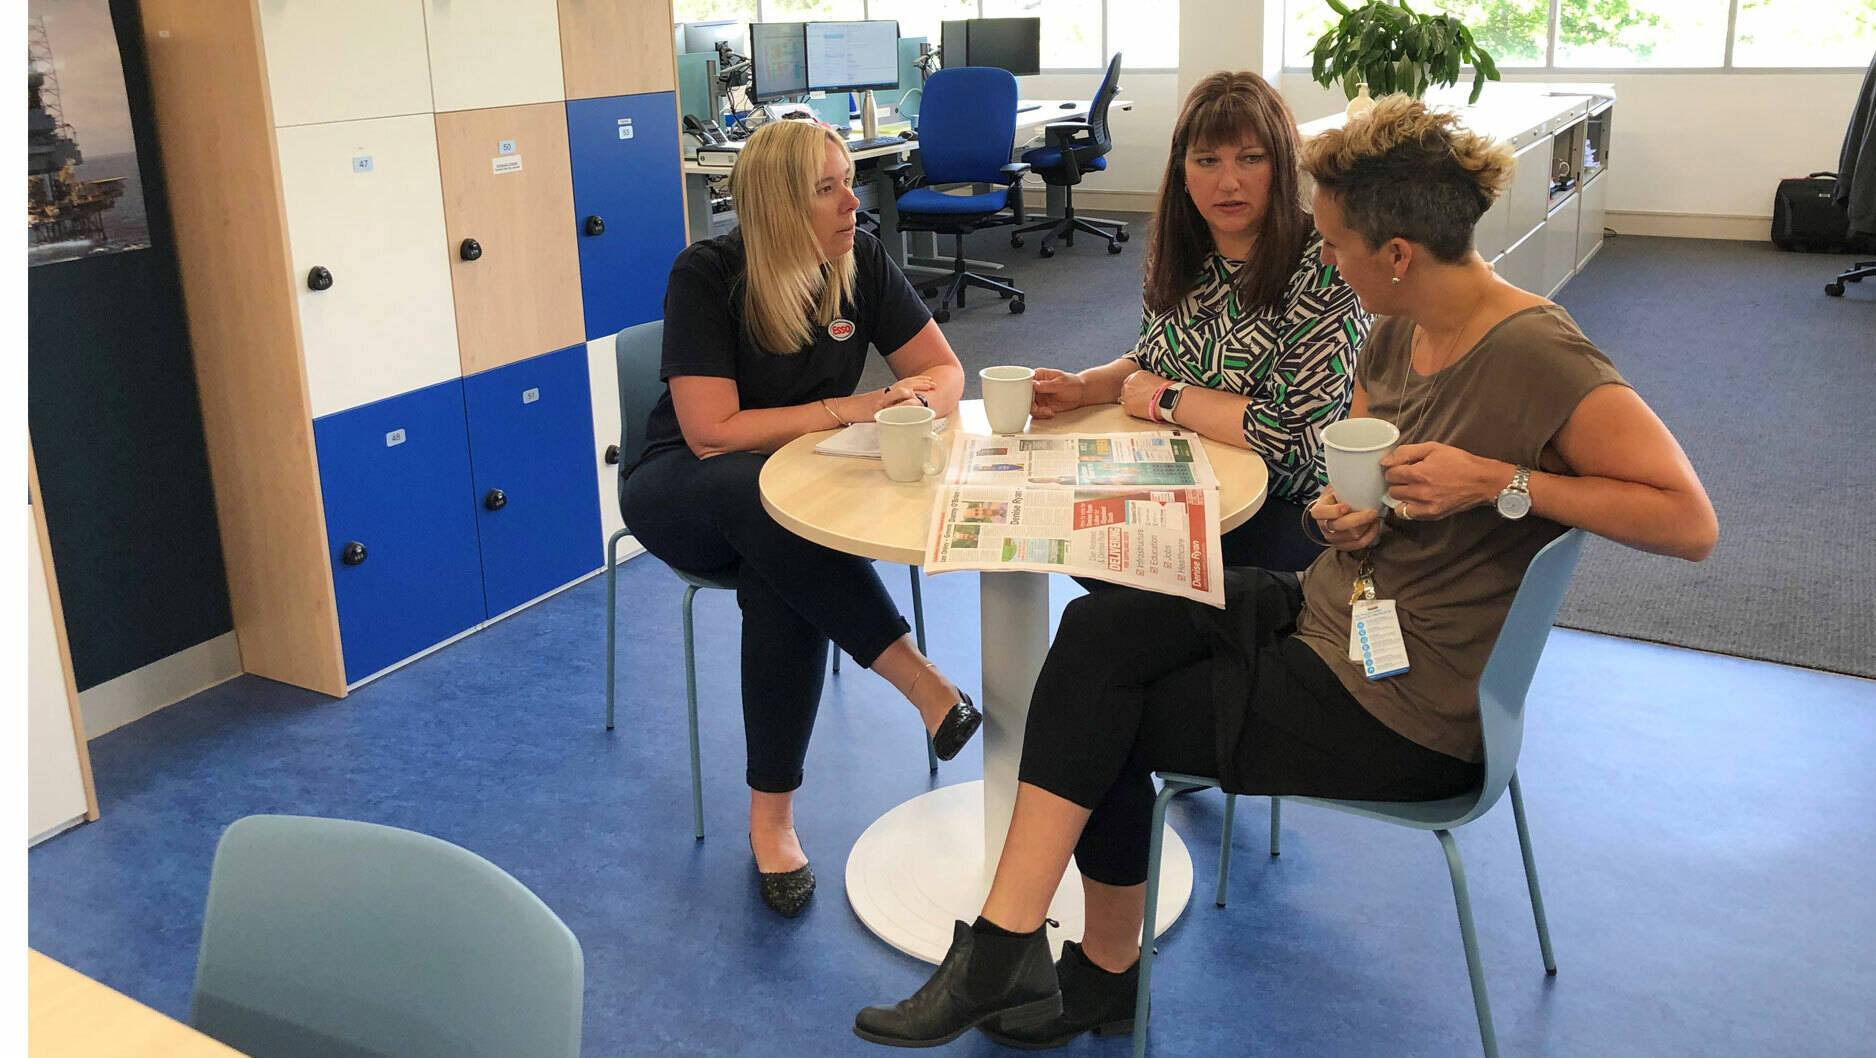 Image Photo — Rebecca Walker, Angela Jones and Chiara Centra from Esso's Sale office are participating as mentors in the ‘Your Past, Their Future, Mentoring Program’.